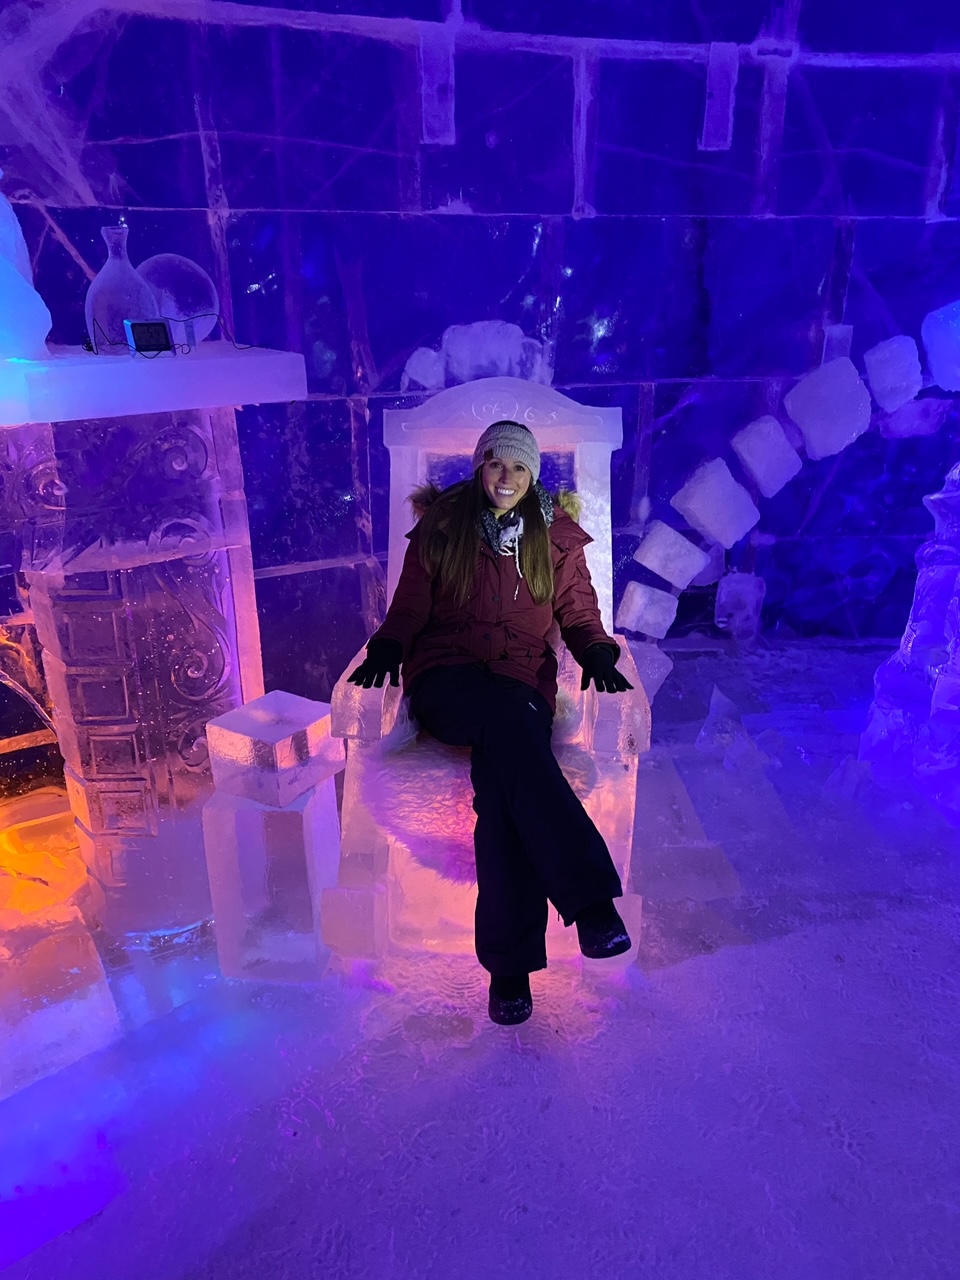 Sara hanging out on a chair made of ice at the Snowhotel Kirkenes